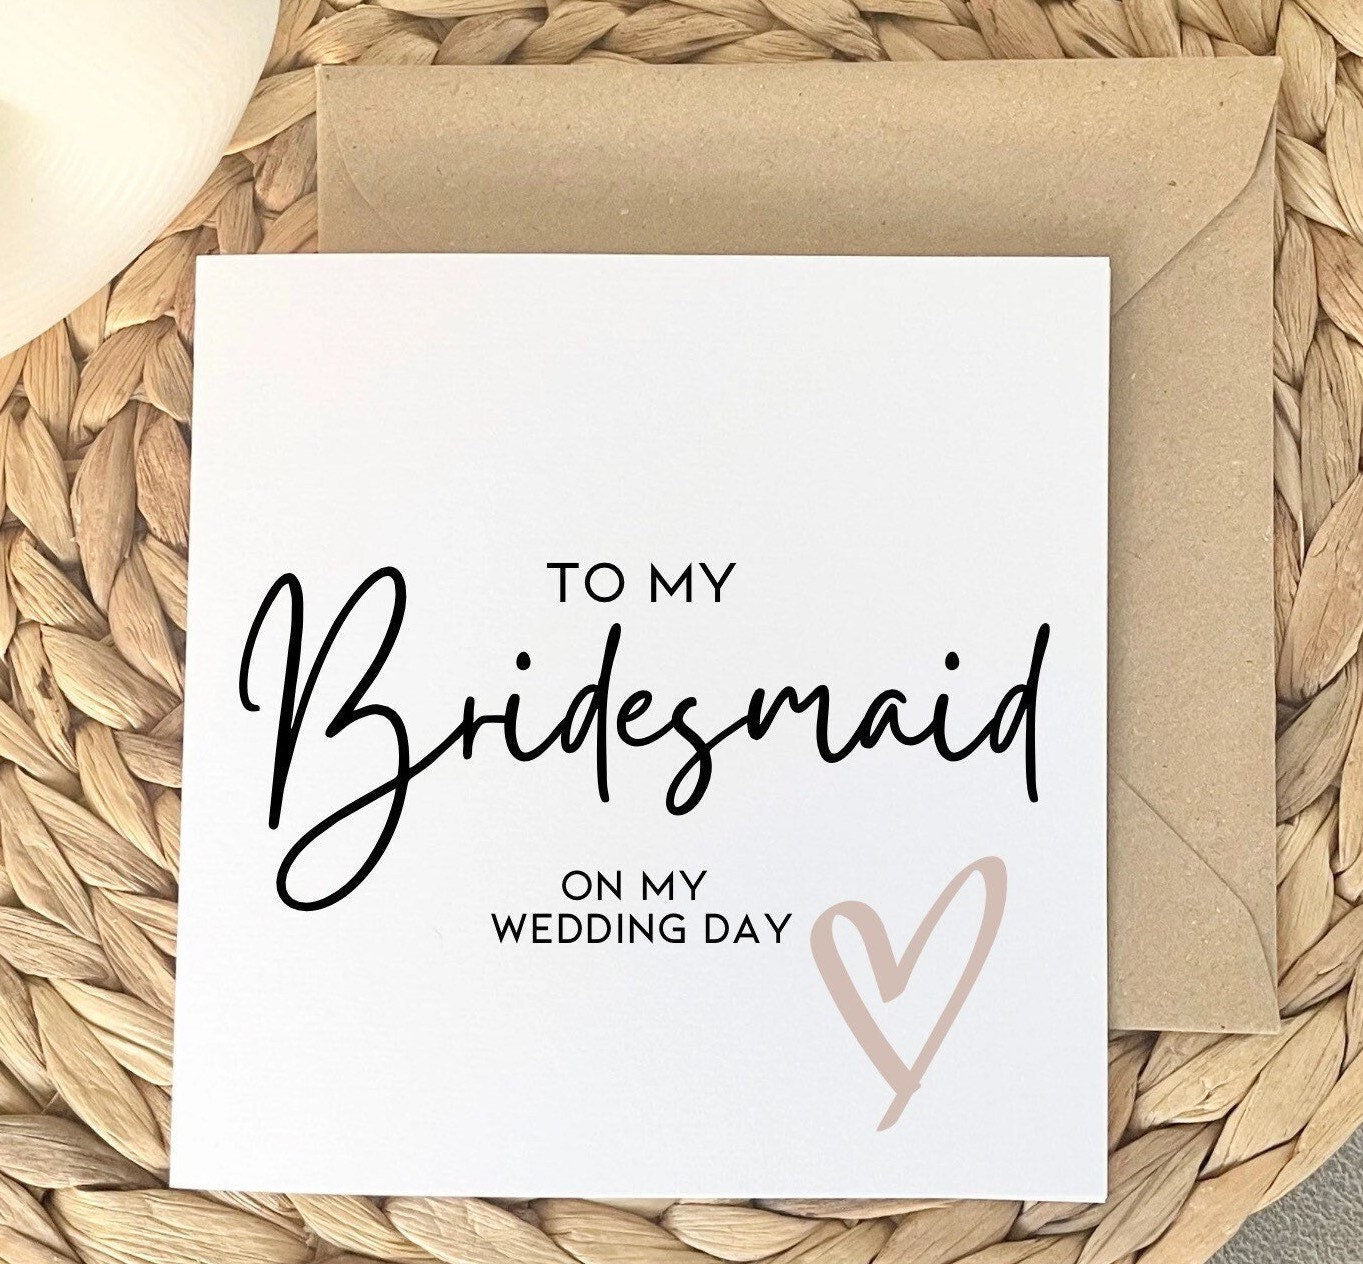 To my Bridesmaid on my wedding day card to say thank you for being my bridesmaid, cards from the bride to her bridesmaids